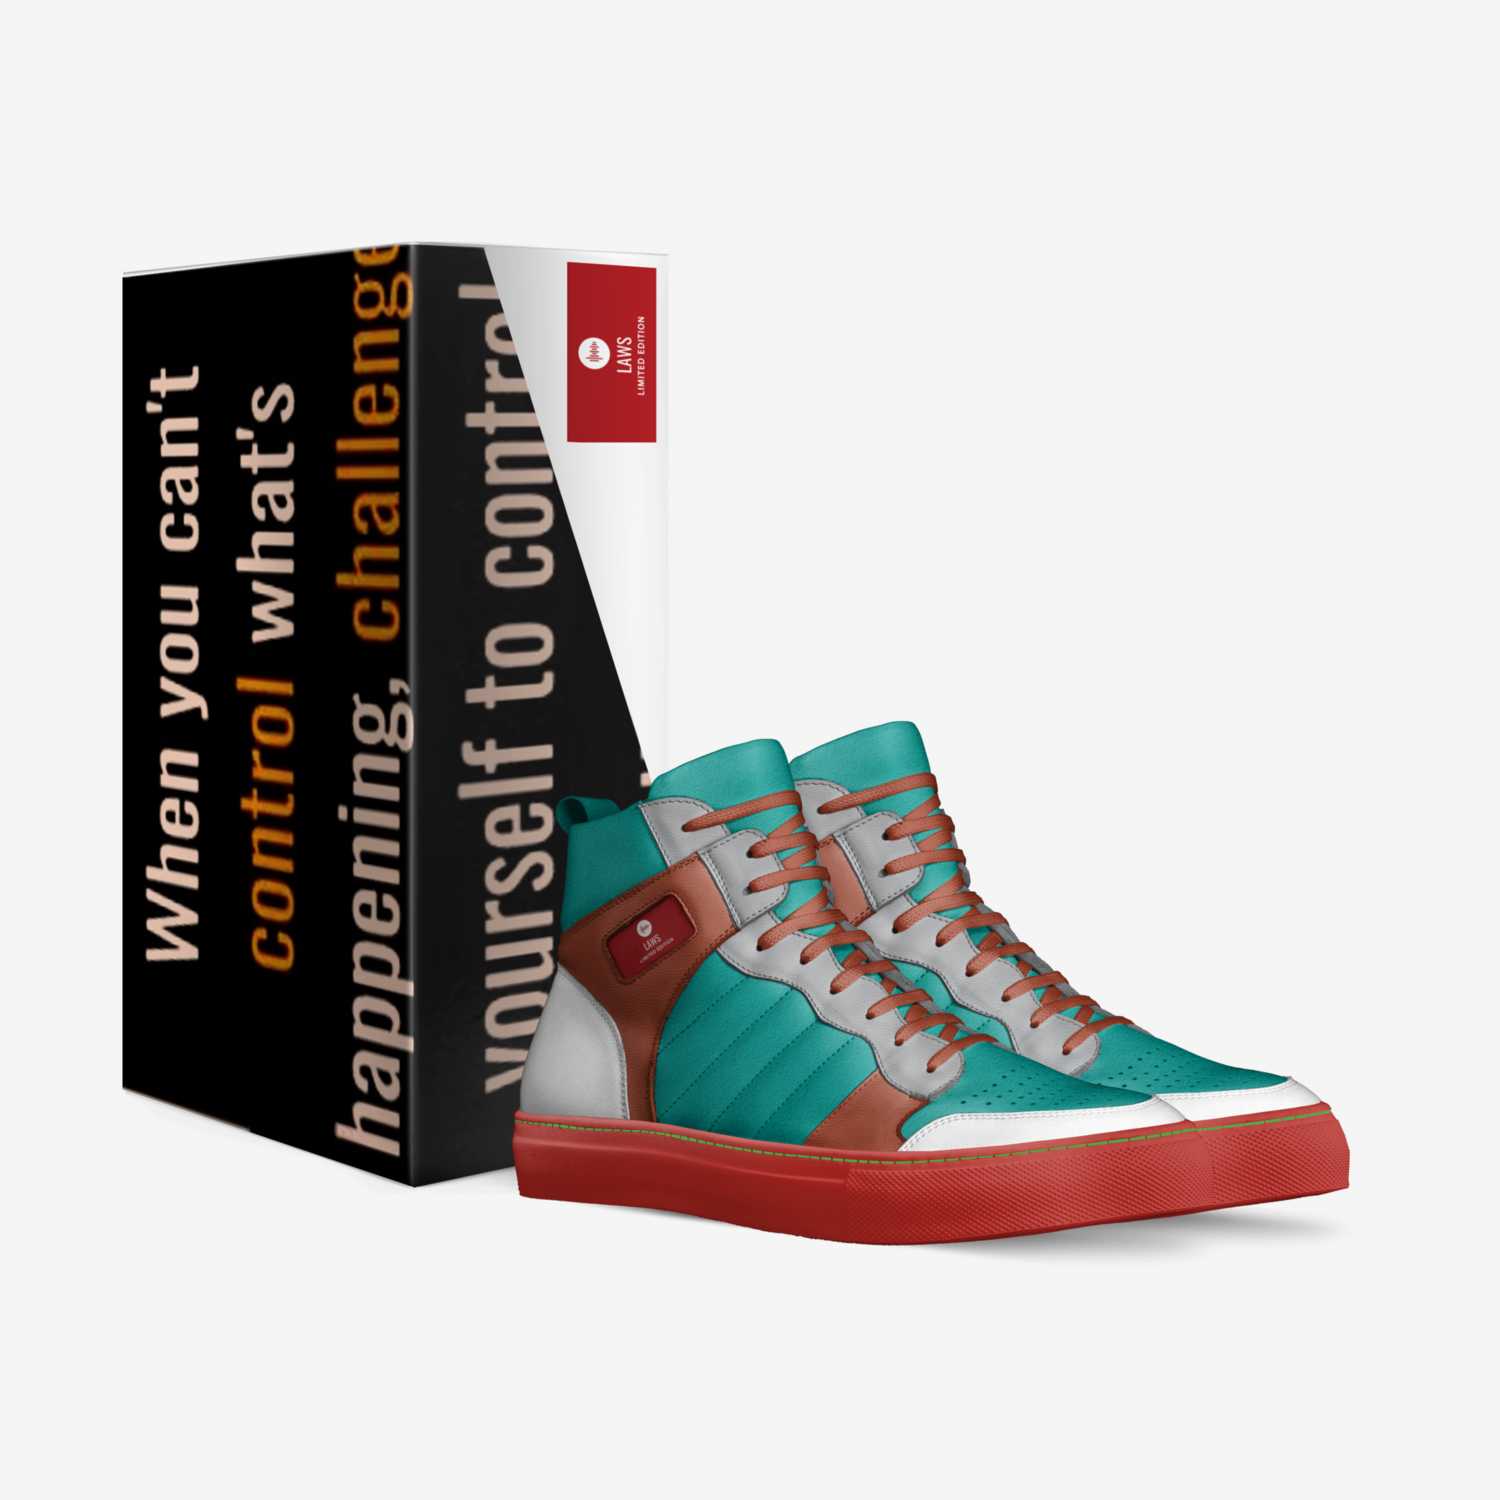 Imme custom made in Italy shoes by Cecilia Wickliffe | Box view